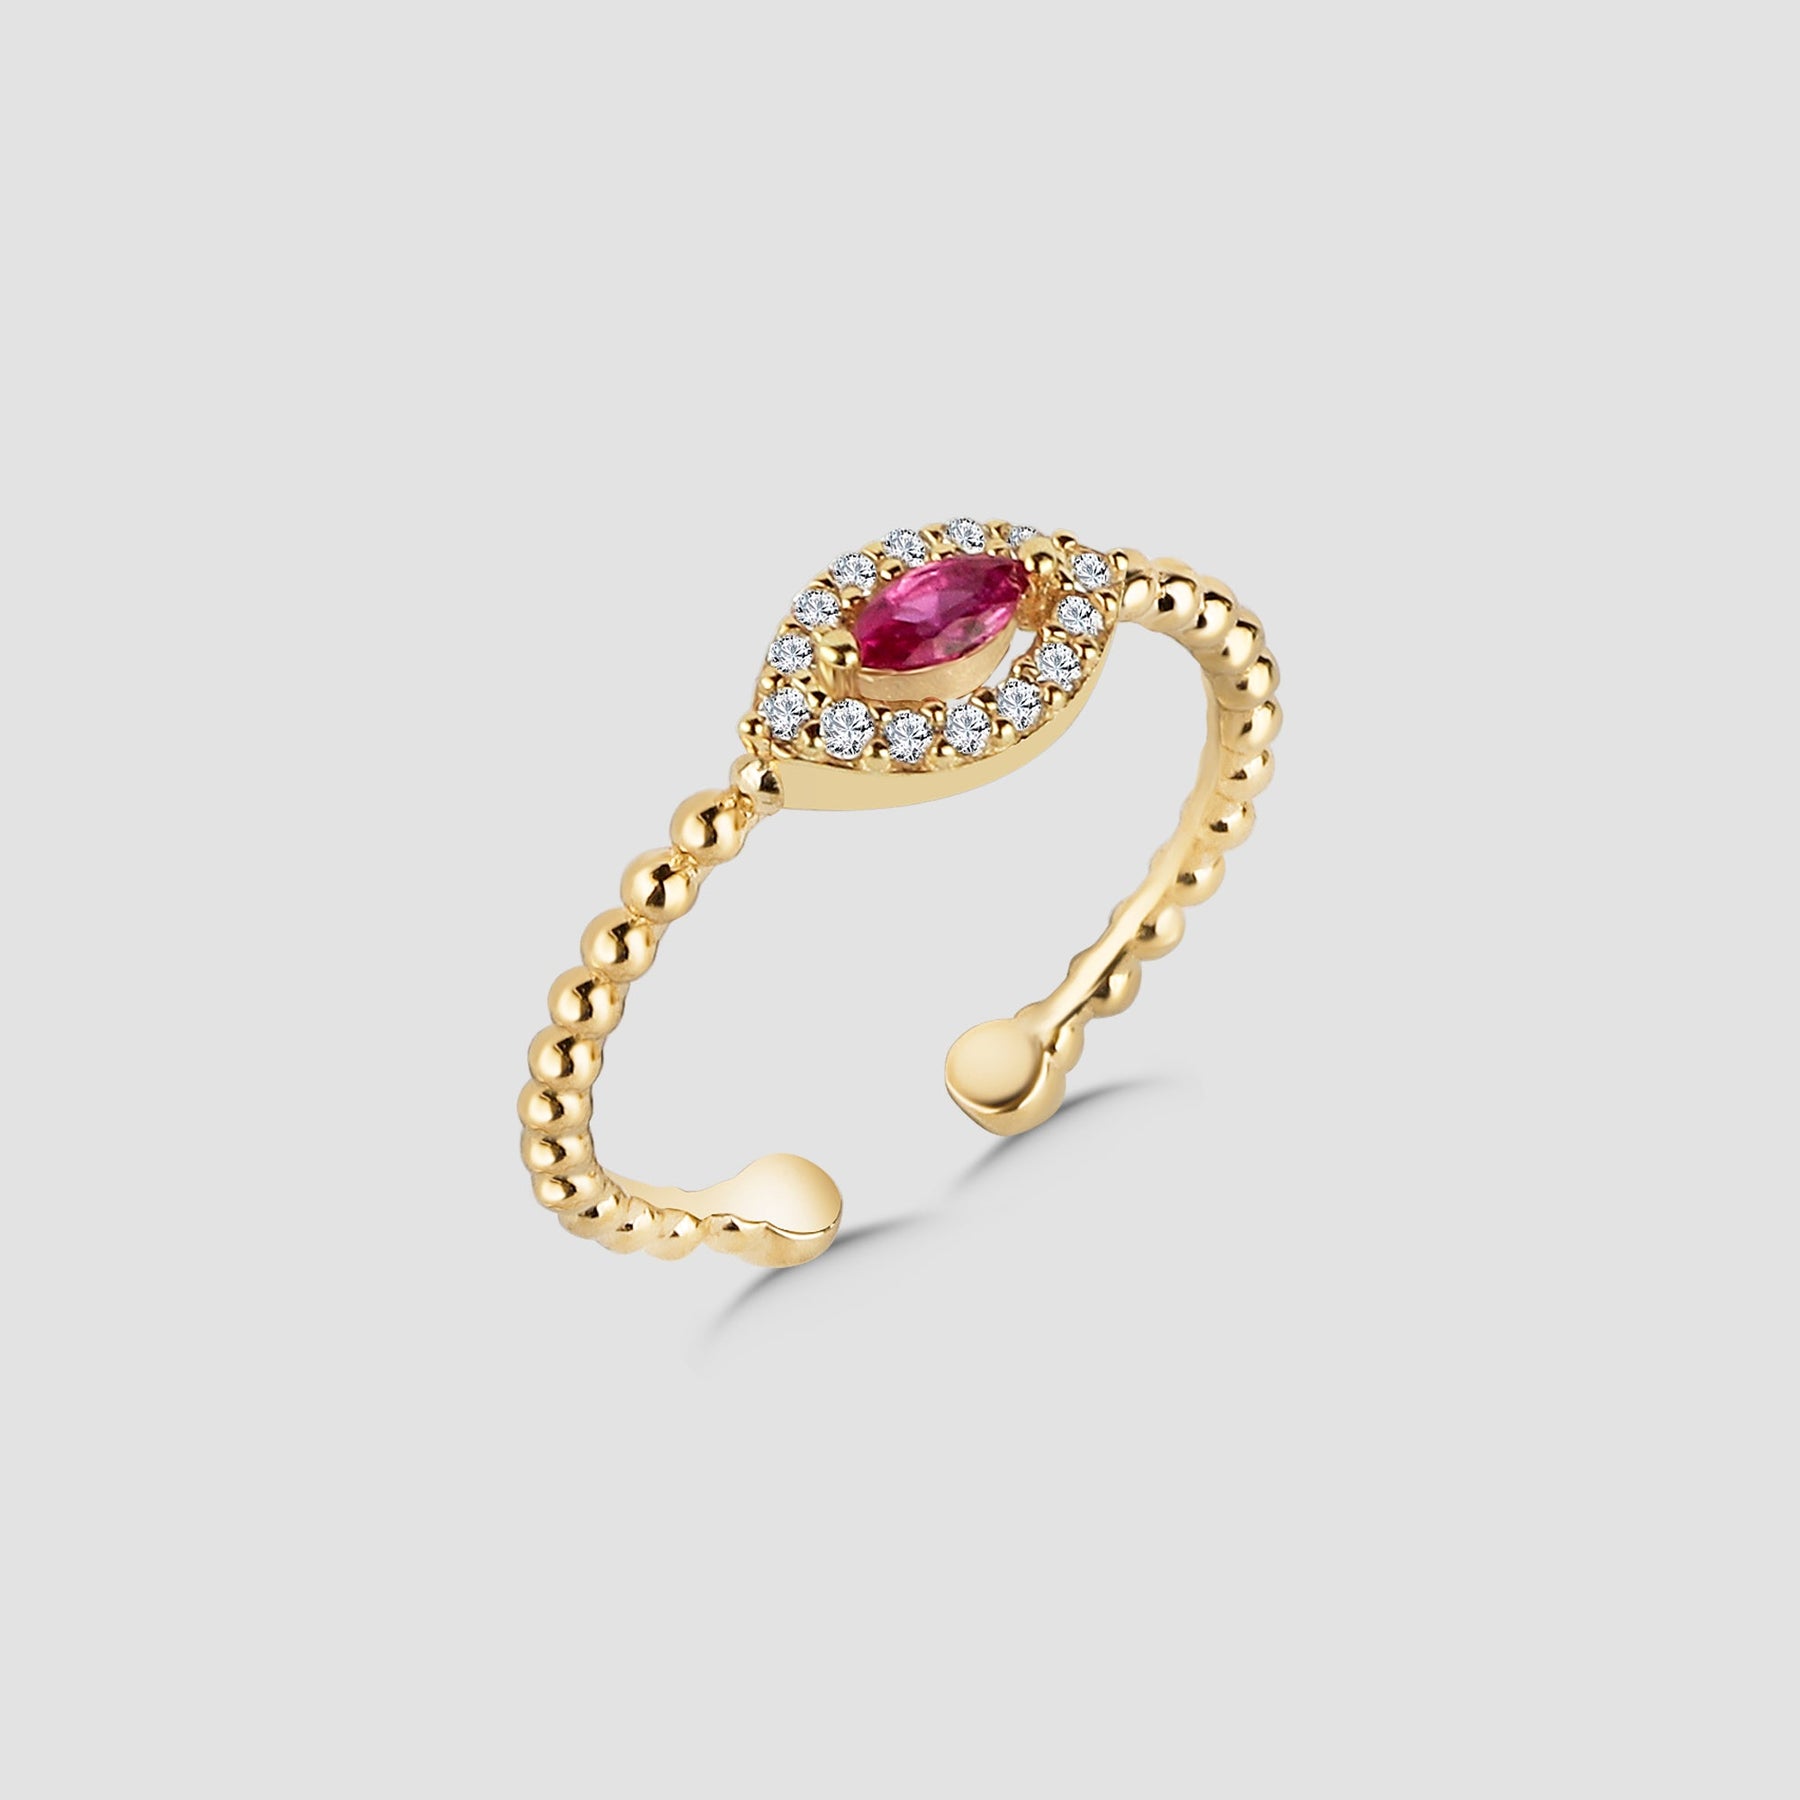 Navette Ruby Ring Shiny Wreath - Gold